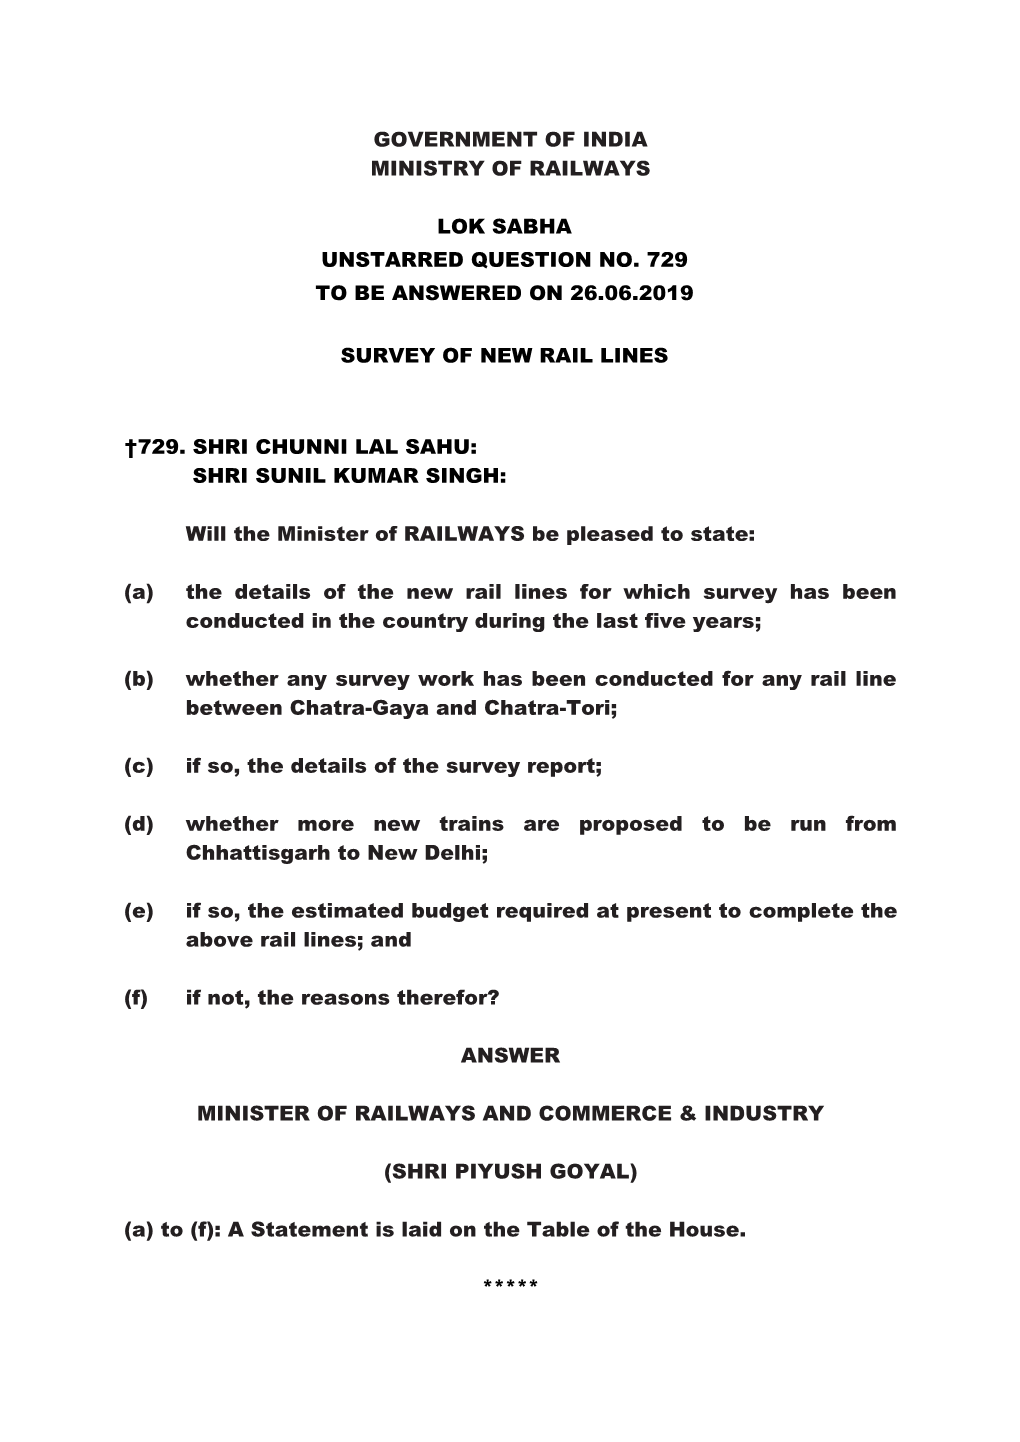 Lok Sabha Unstarred Question No. 729 to Be Answered on 26.06.2019